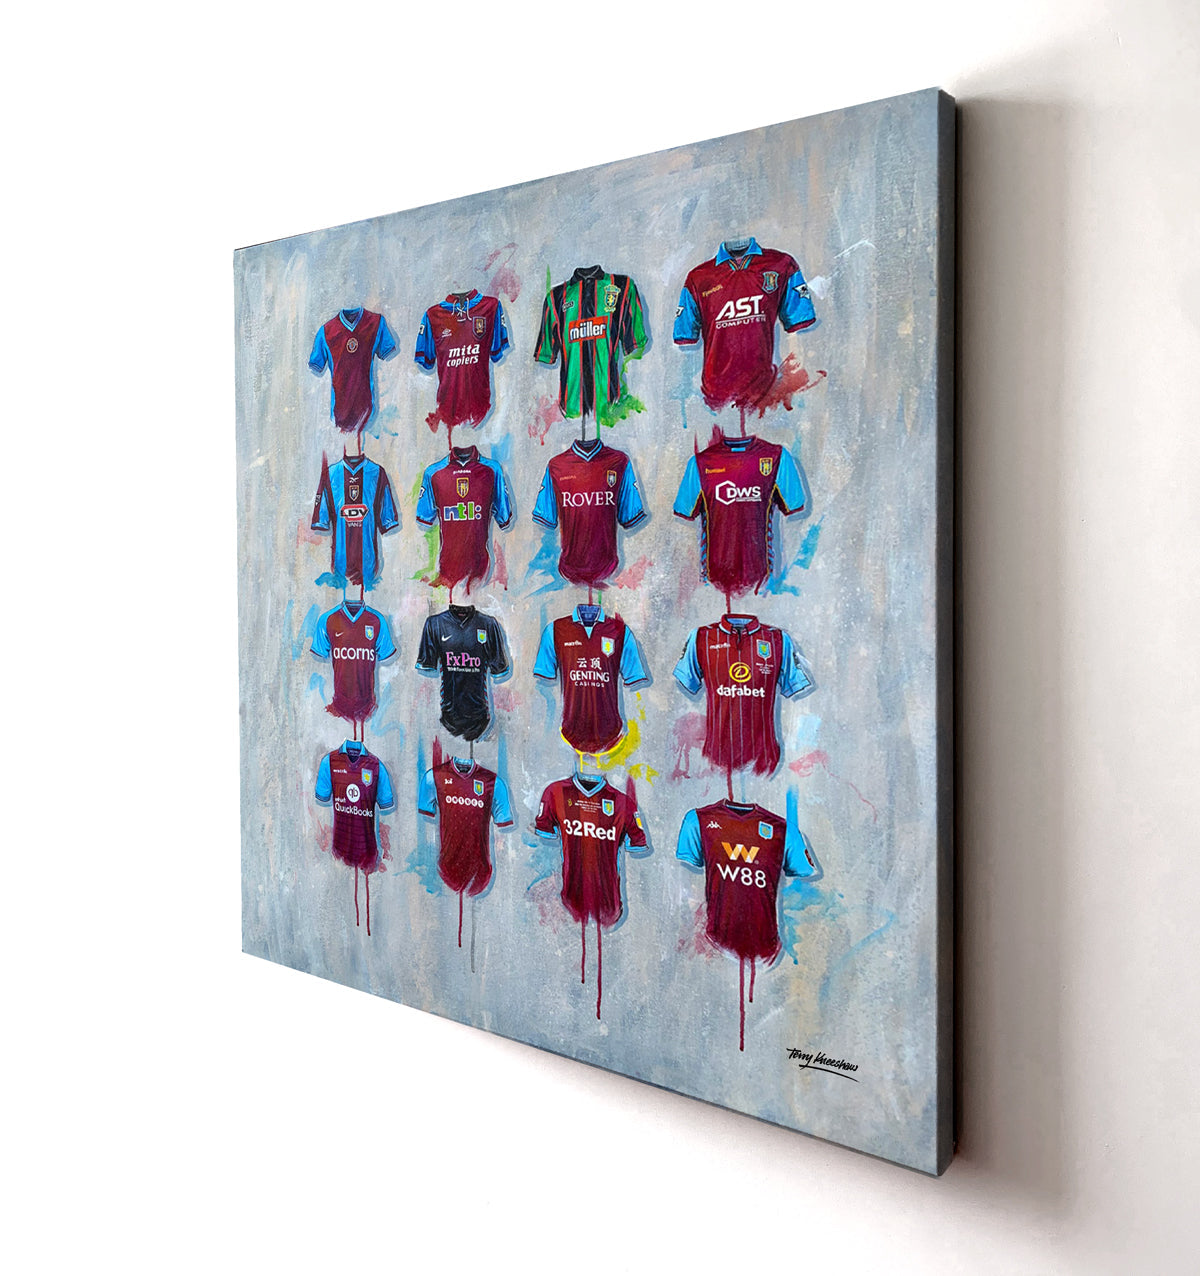 Aston Villa Canvases by Terry Kneeshaw are a collection of impressive artworks that come in various sizes, including 20x20, 30x30, and 40x40. Each canvas is available in either a framed or unframed black floating frame. The artwork features a striking abstract composition with bold colors and textures that pay tribute to the legendary Aston Villa team. Perfect for any Aston Villa fan or football enthusiast, these canvases are a great addition to any room and are sure to impress.